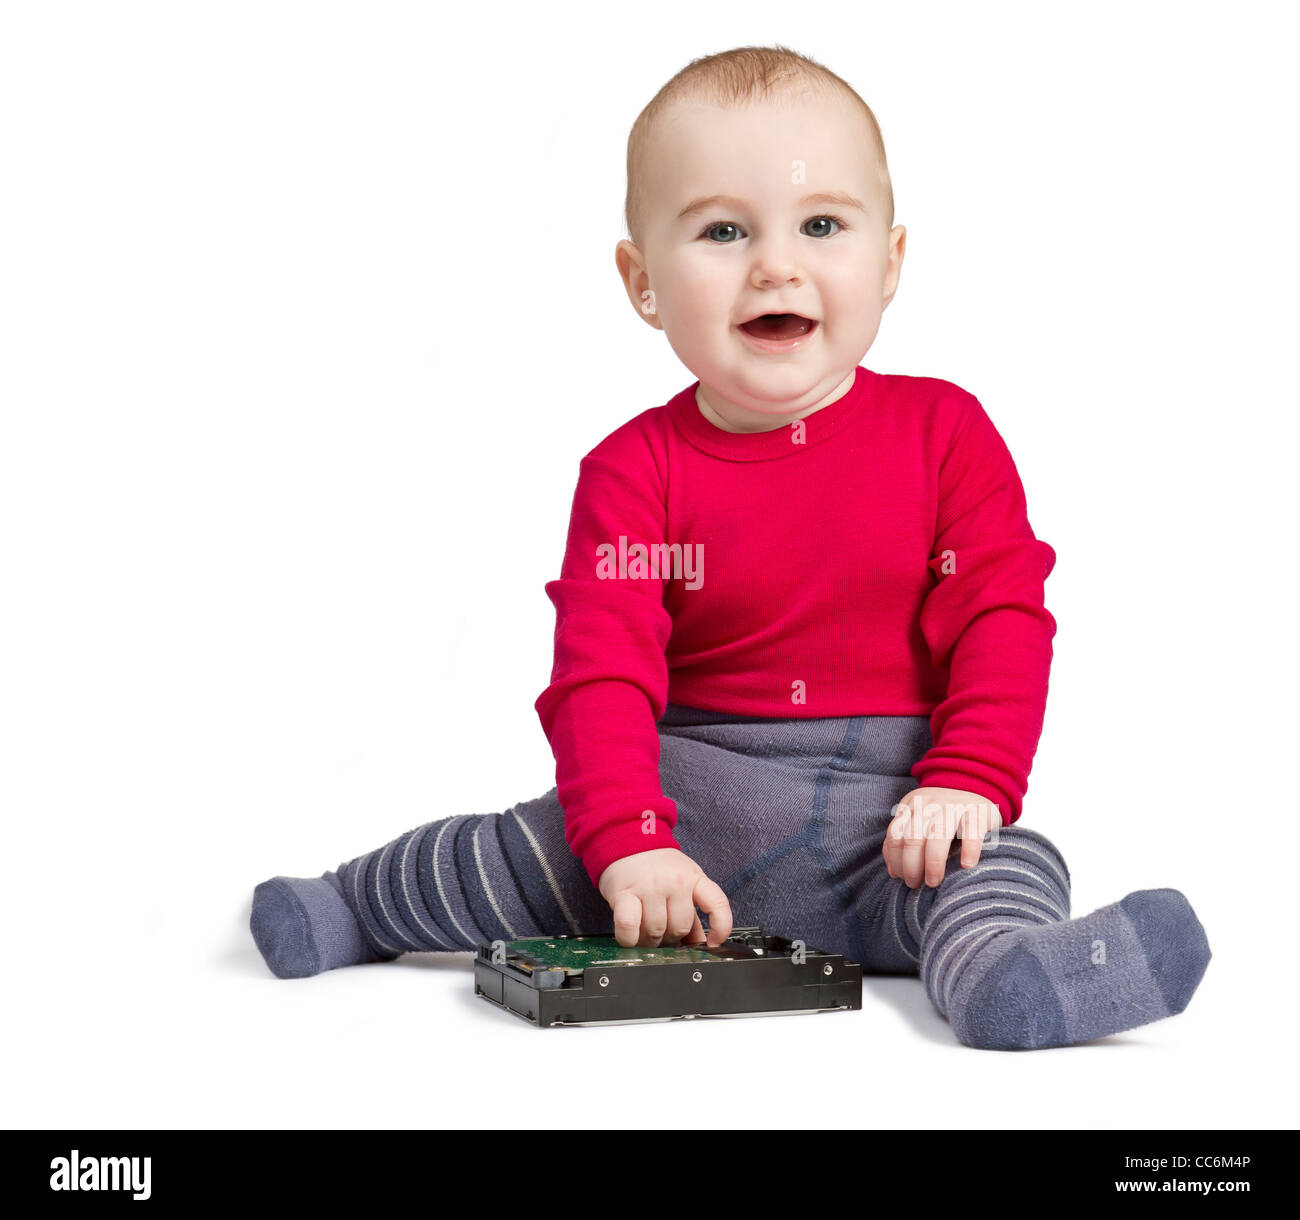 young child in white background with hard drive. red shirt and blue trousers Stock Photo